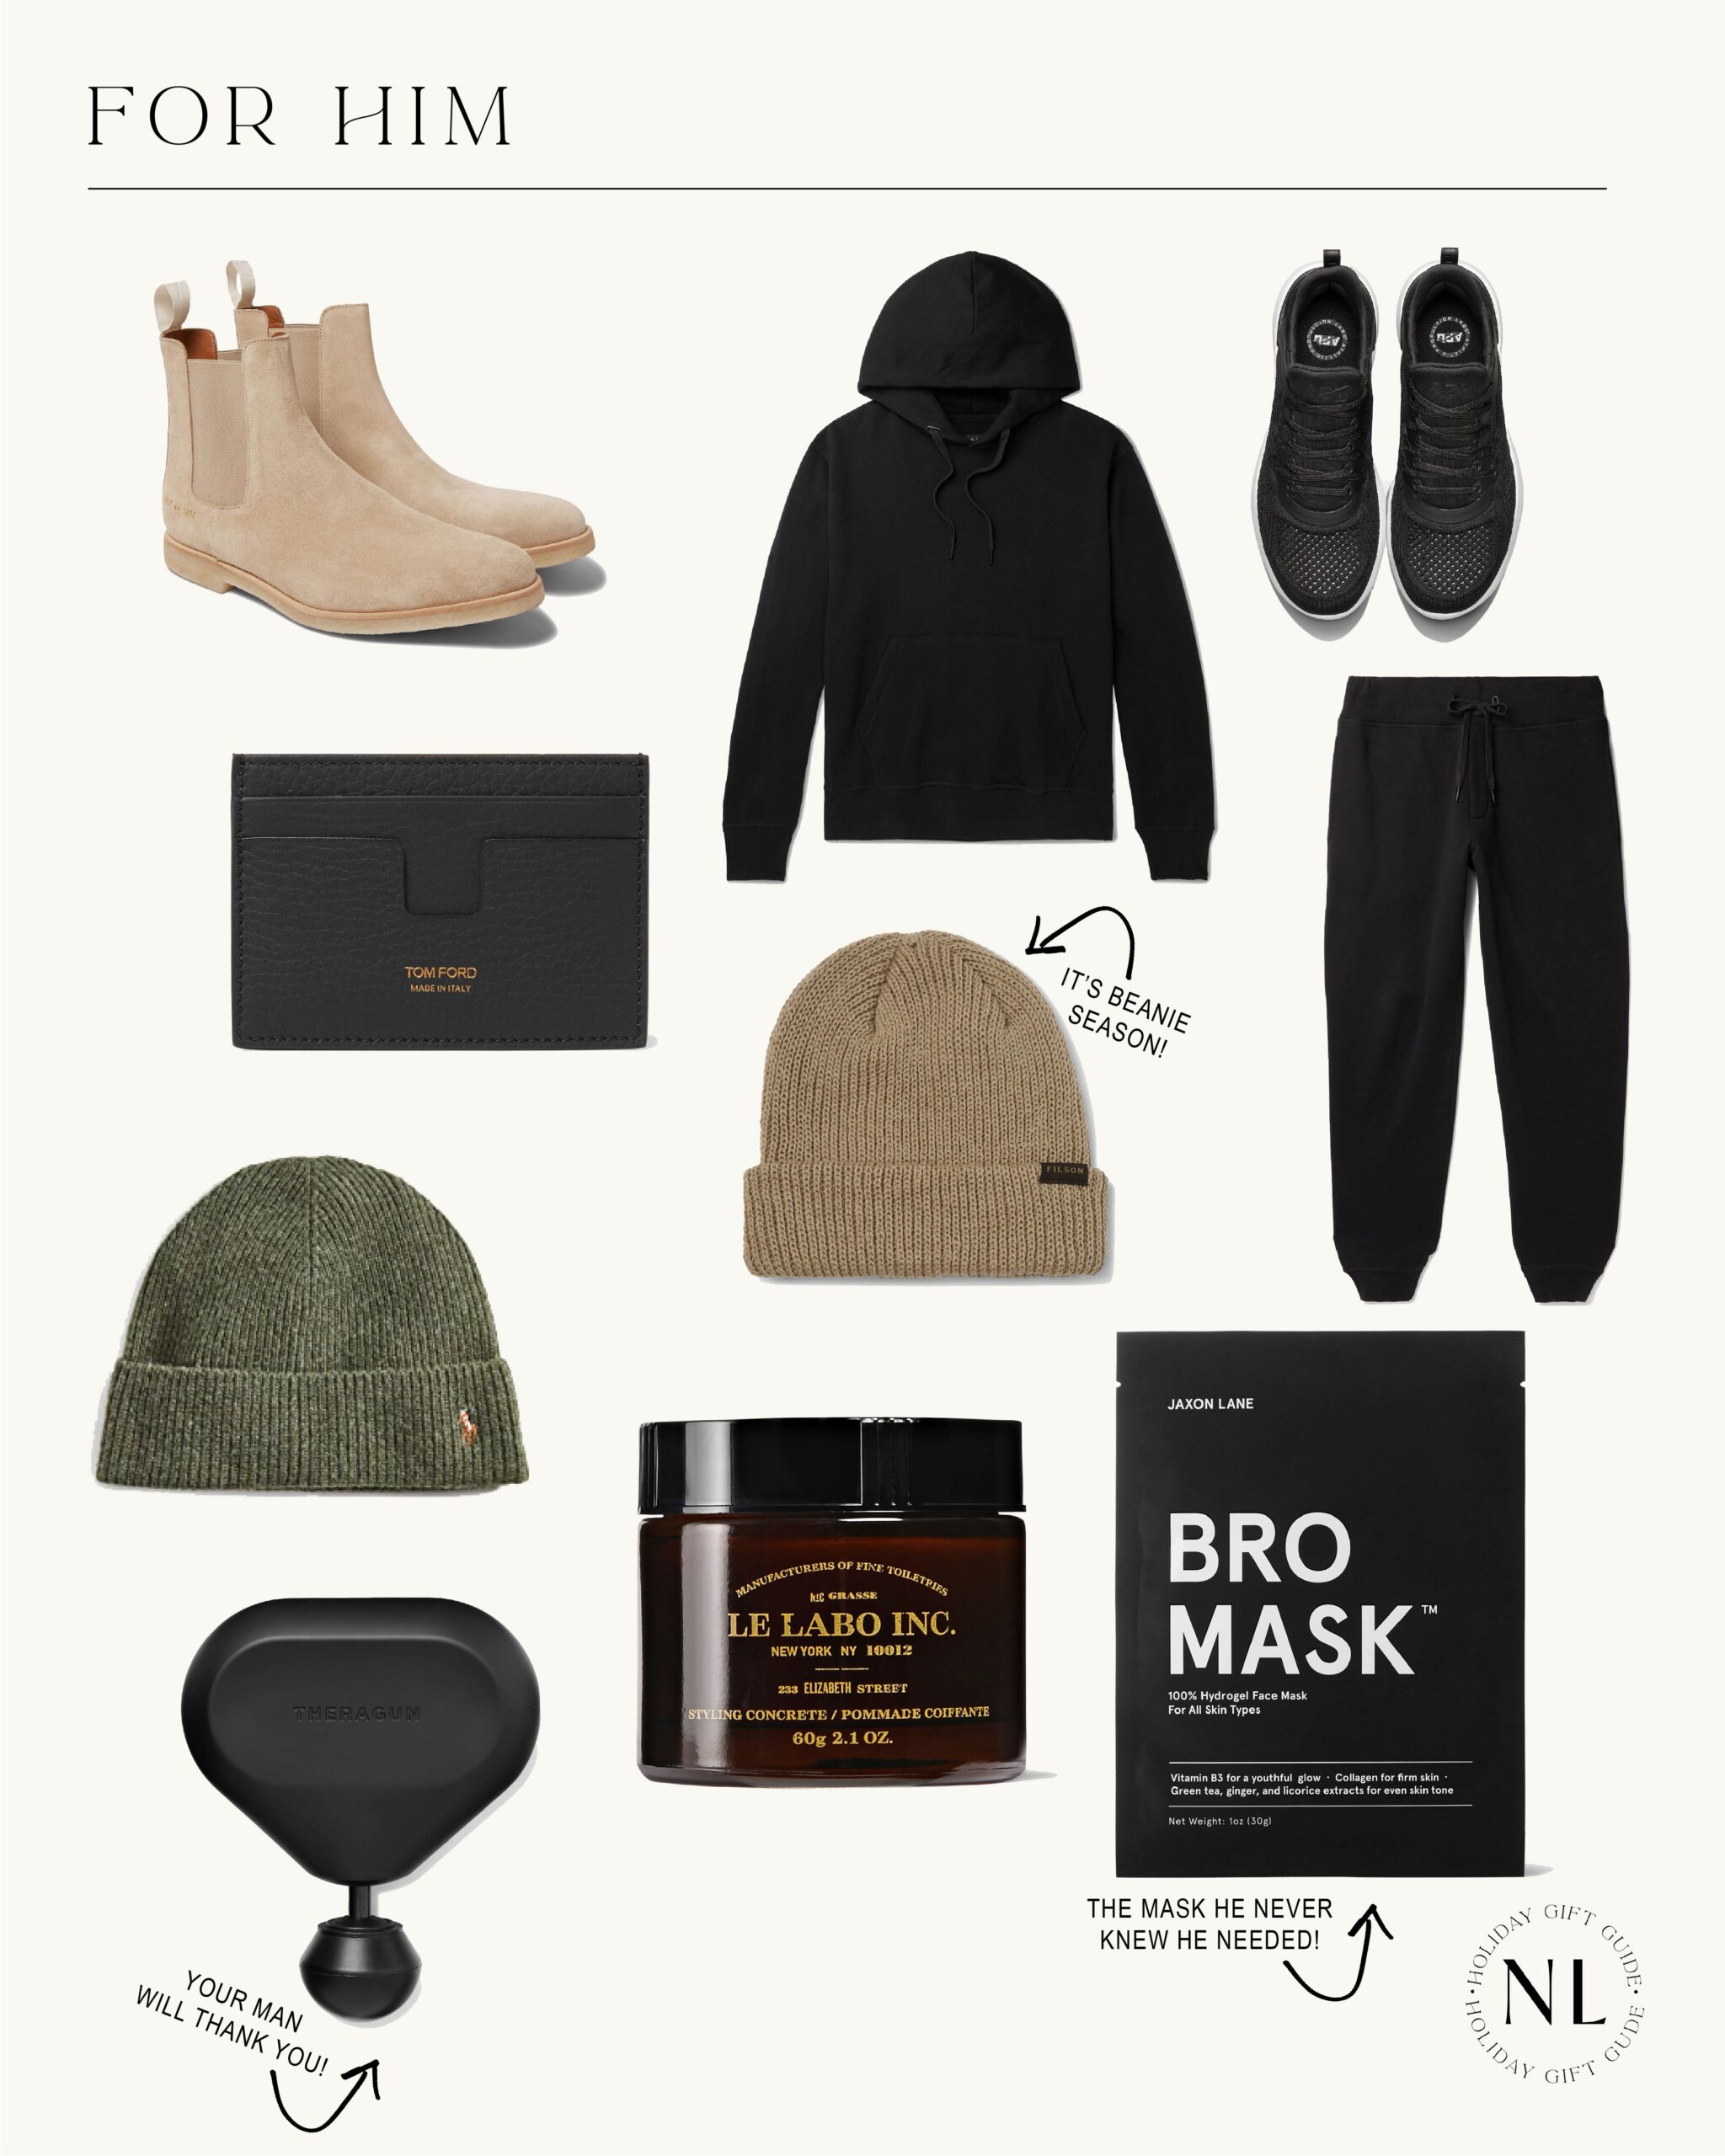 GIFT GUIDE: Gifts For Him